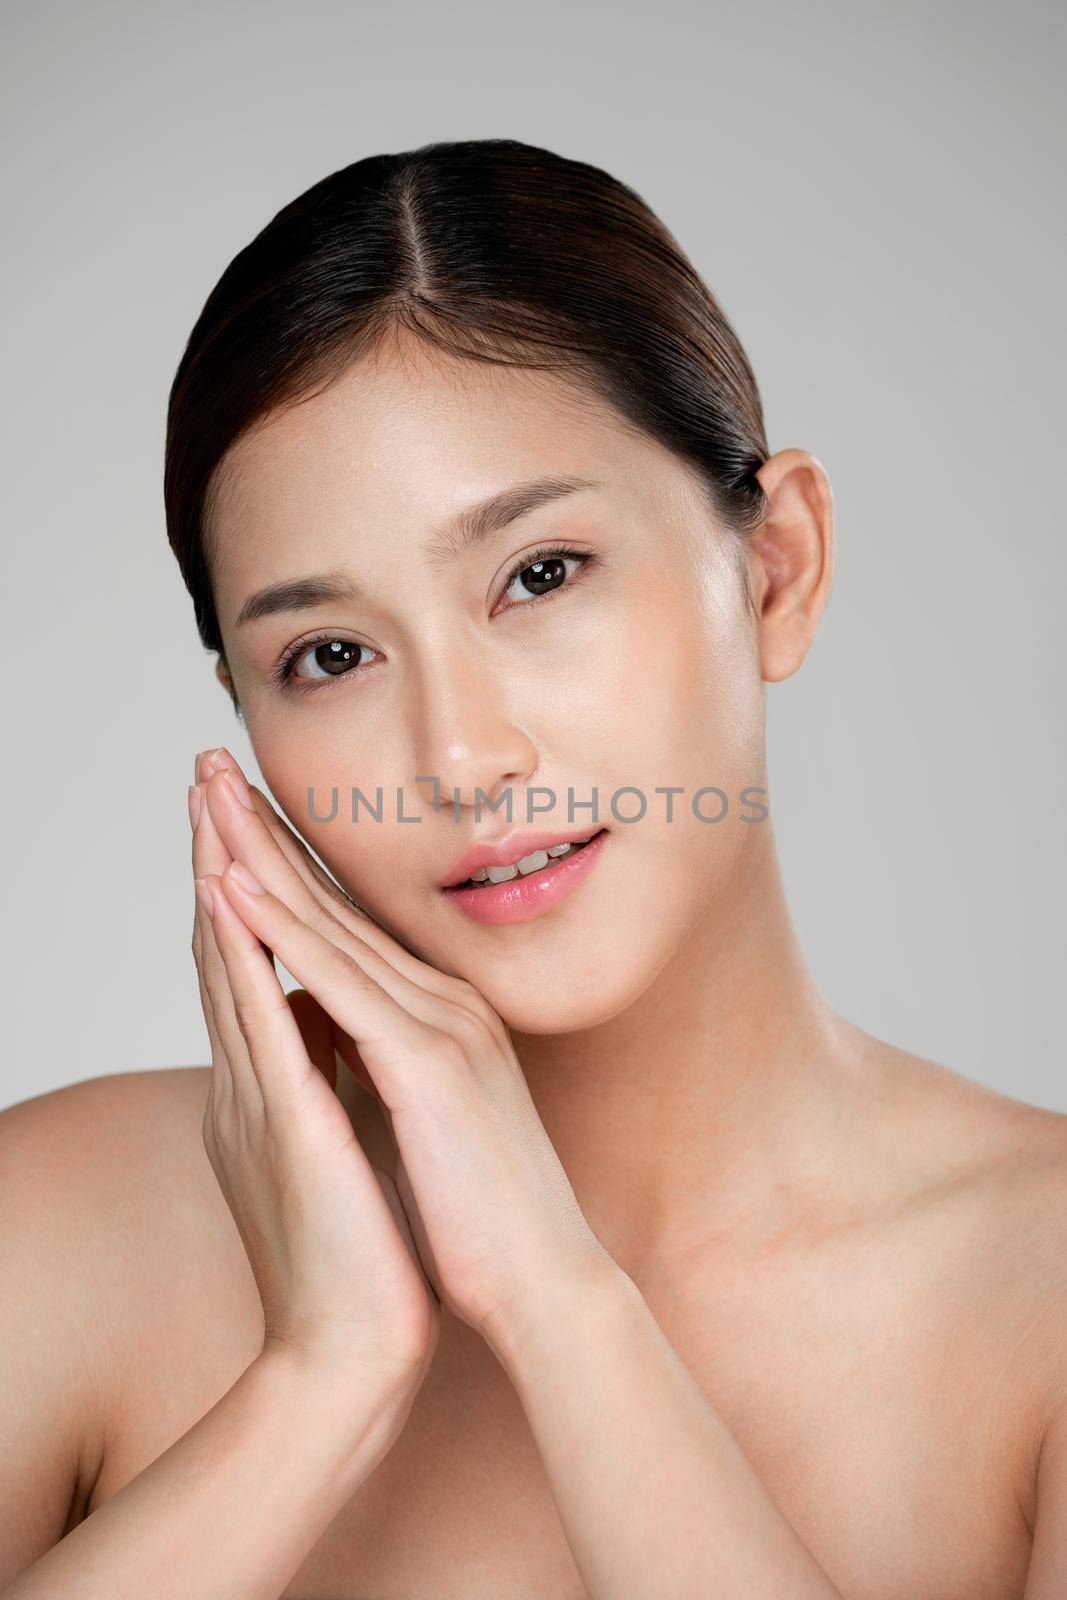 Closeup ardent young woman posing beauty gesture with clean fresh skin. by biancoblue